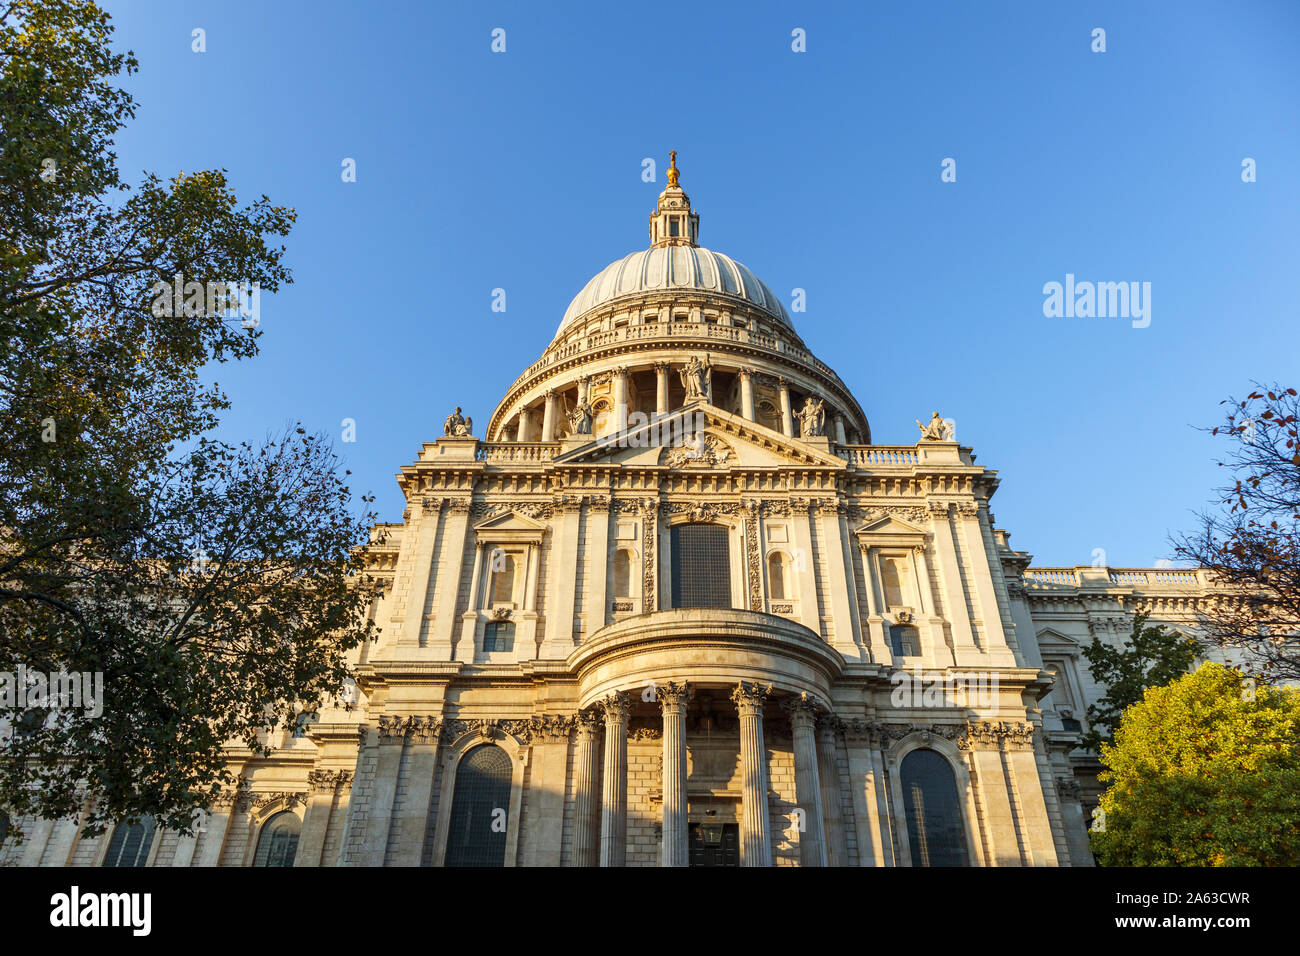 View from St Paul's Churchyard of the London landmark, historic St Paul's Cathedral and dome designed by Sir Christopher Wren on a sunny autumn day Stock Photo